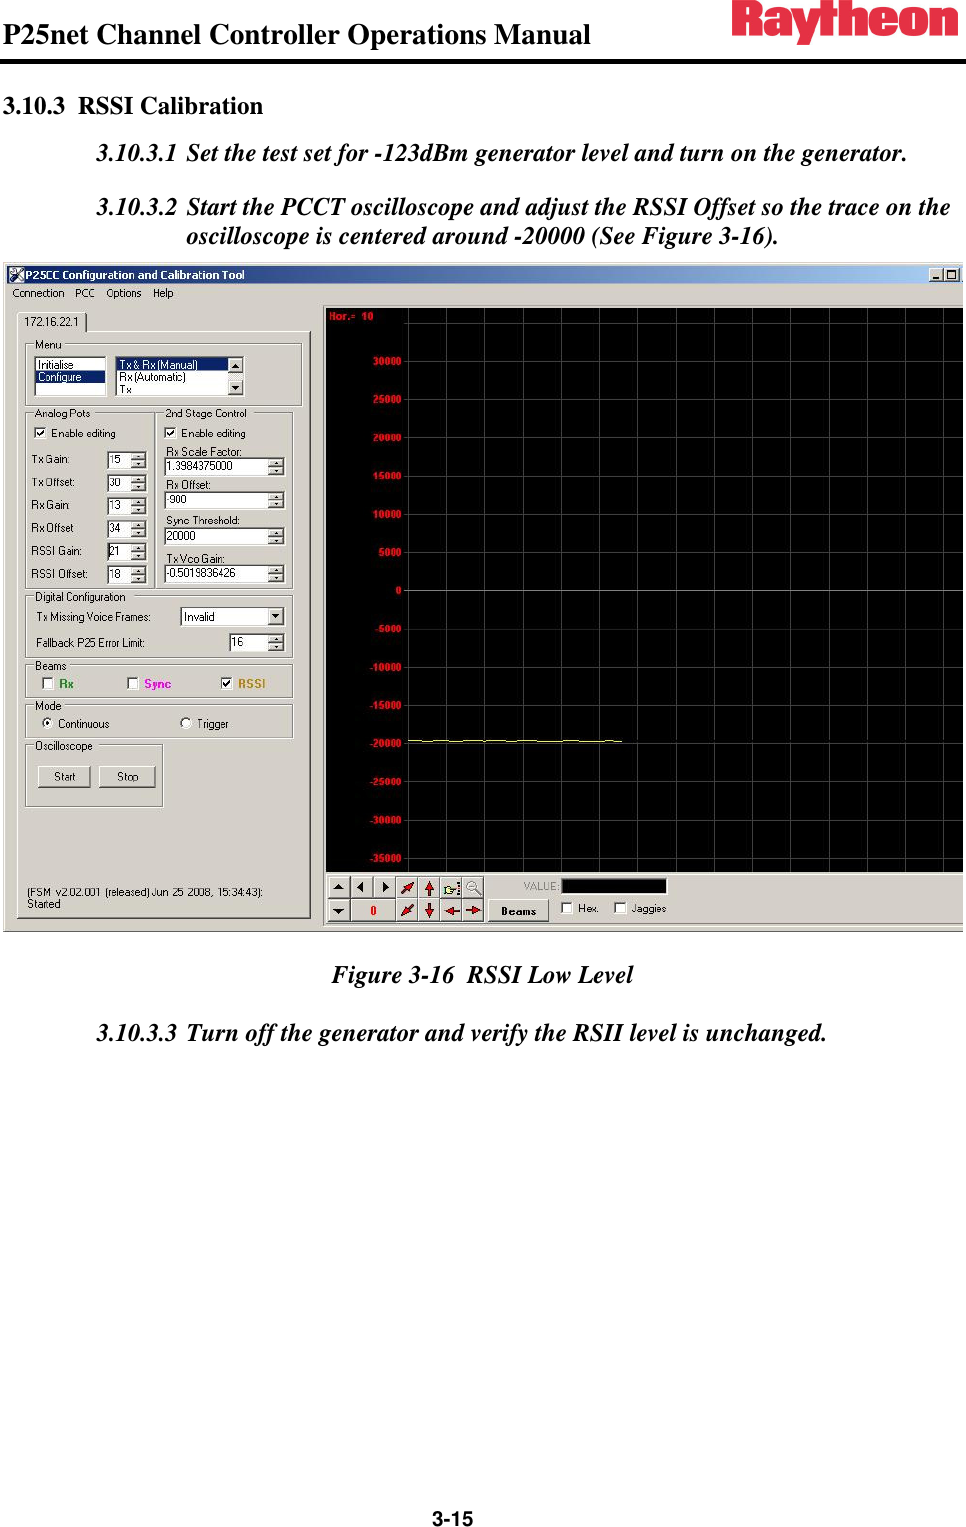 P25net Channel Controller Operations Manual                 3-15 3.10.3 RSSI Calibration 3.10.3.1 Set the test set for -123dBm generator level and turn on the generator. 3.10.3.2 Start the PCCT oscilloscope and adjust the RSSI Offset so the trace on the oscilloscope is centered around -20000 (See Figure 3-16).  Figure 3-16  RSSI Low Level 3.10.3.3 Turn off the generator and verify the RSII level is unchanged.  